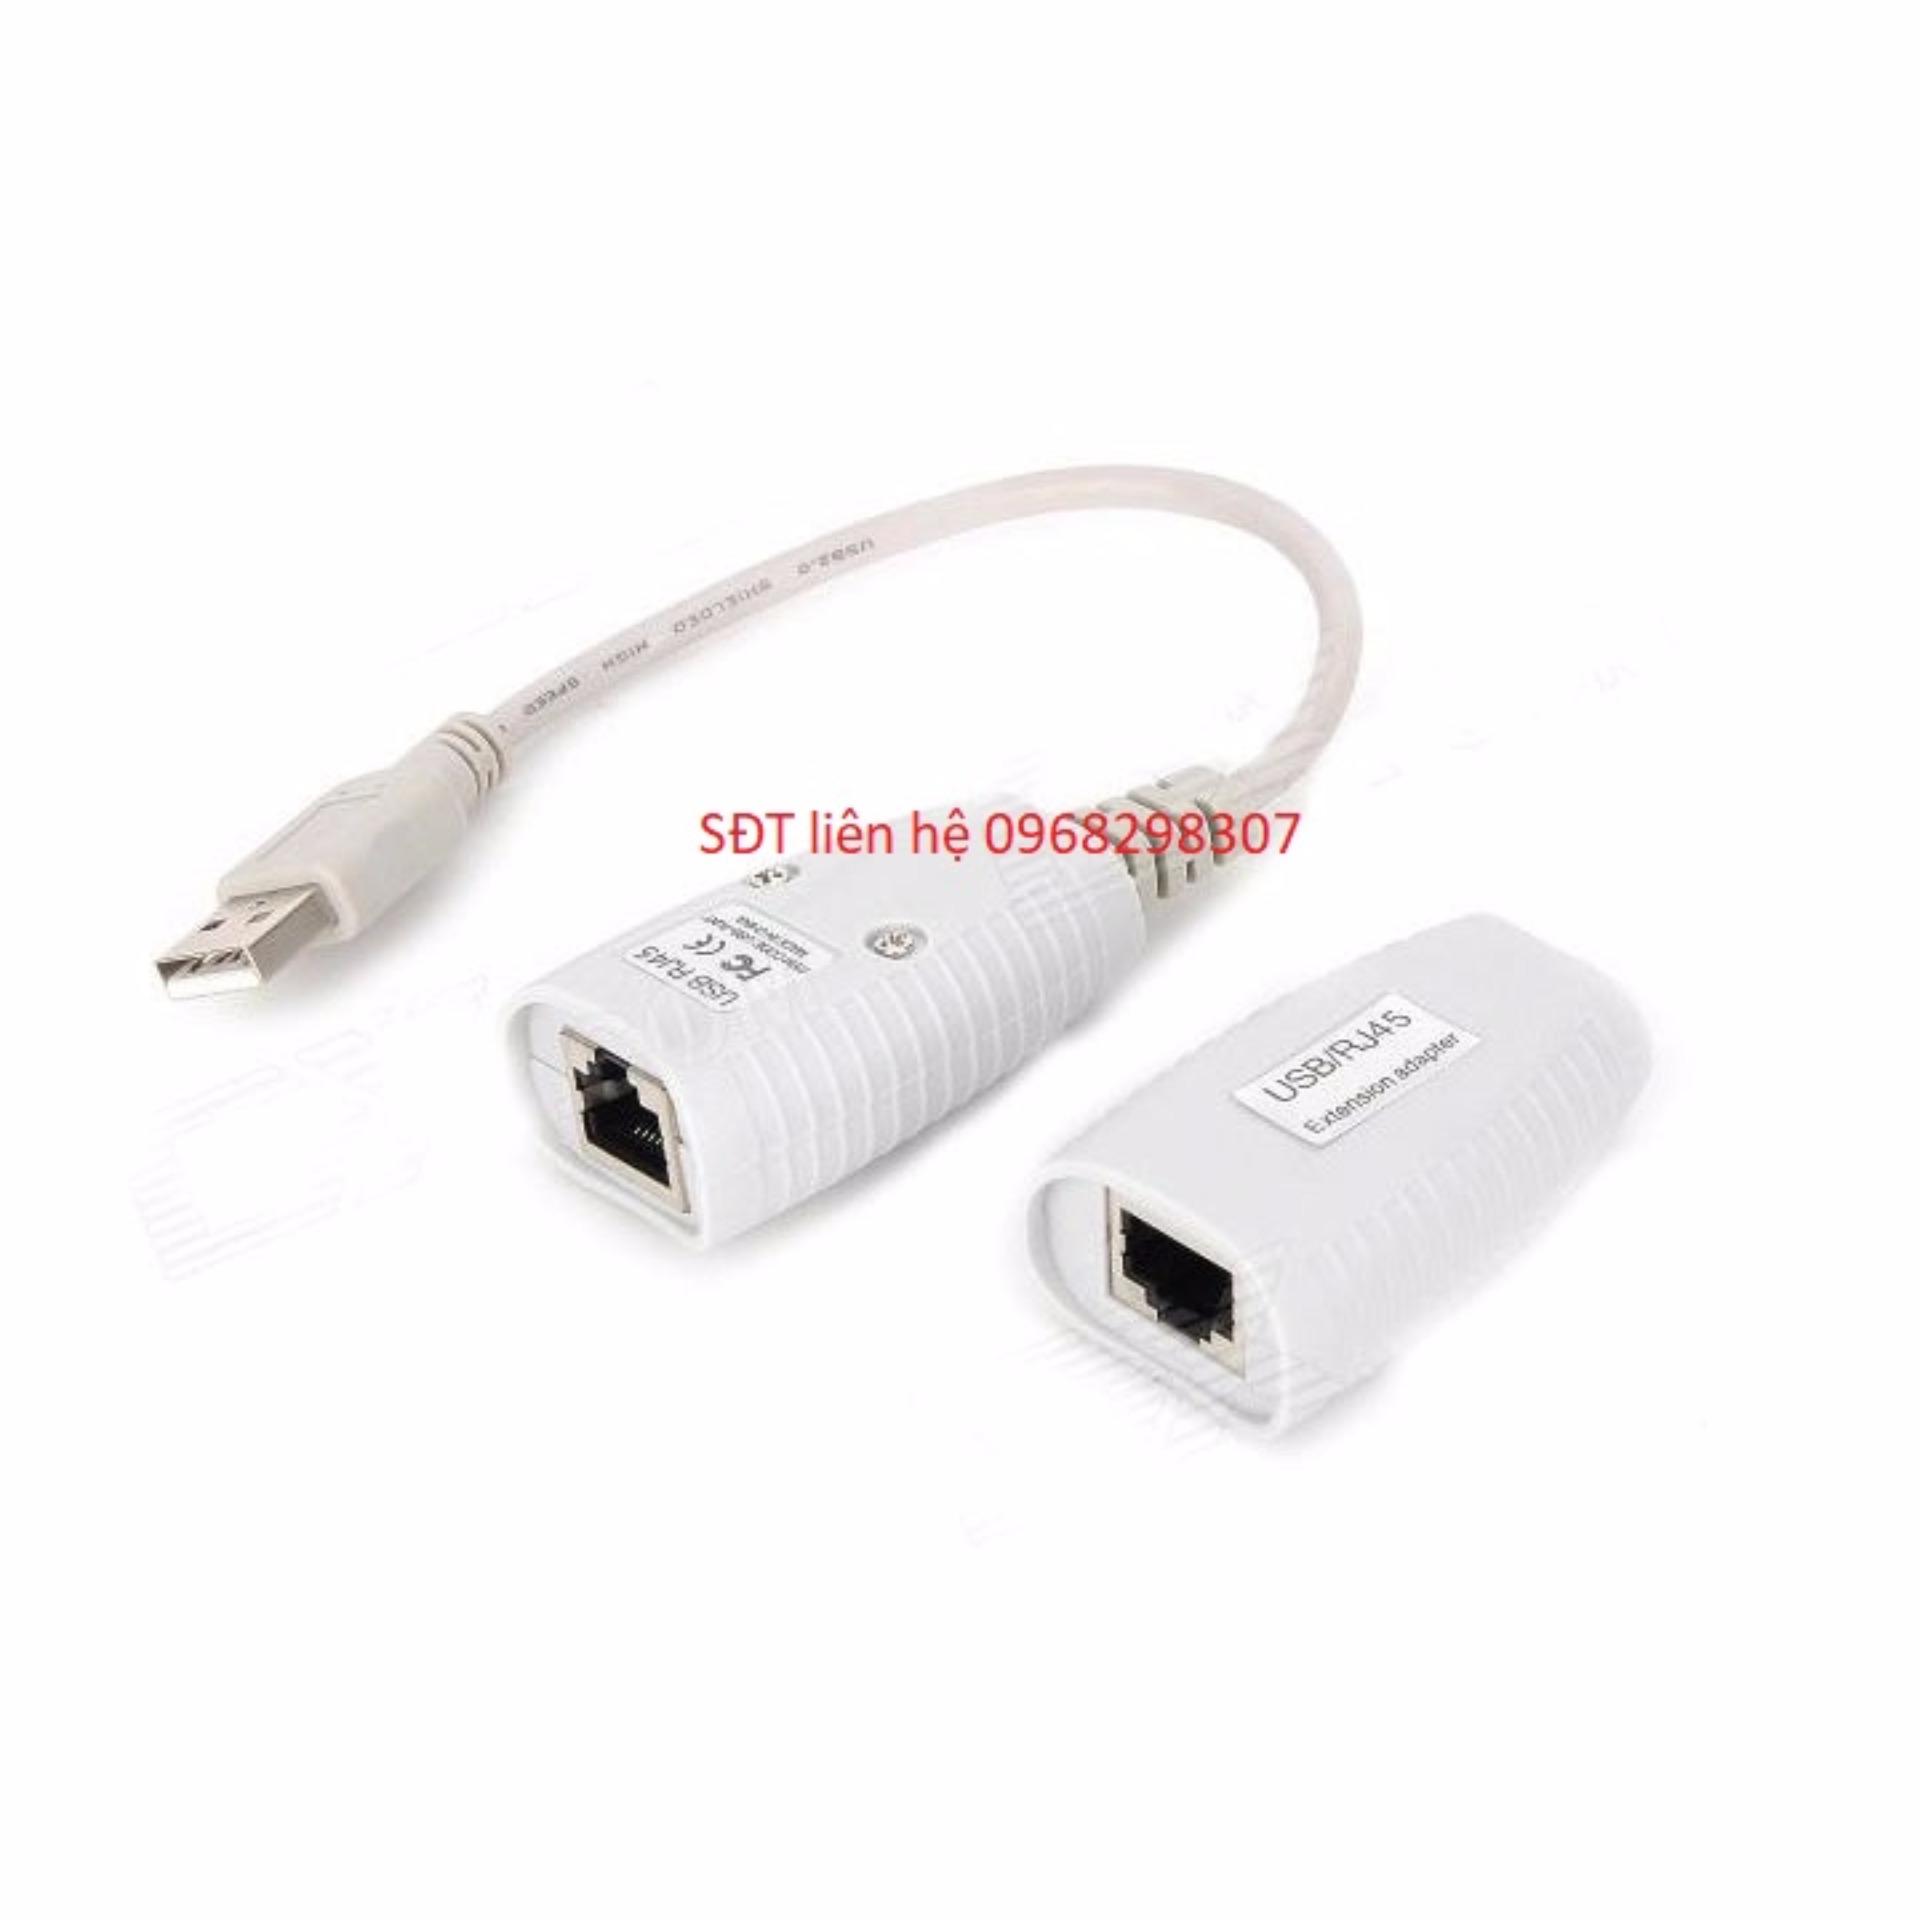 USB to RJ45 LAN Cable Extension Adapter Extender Over Cat5 RJ45 Cat6 Patch Cord